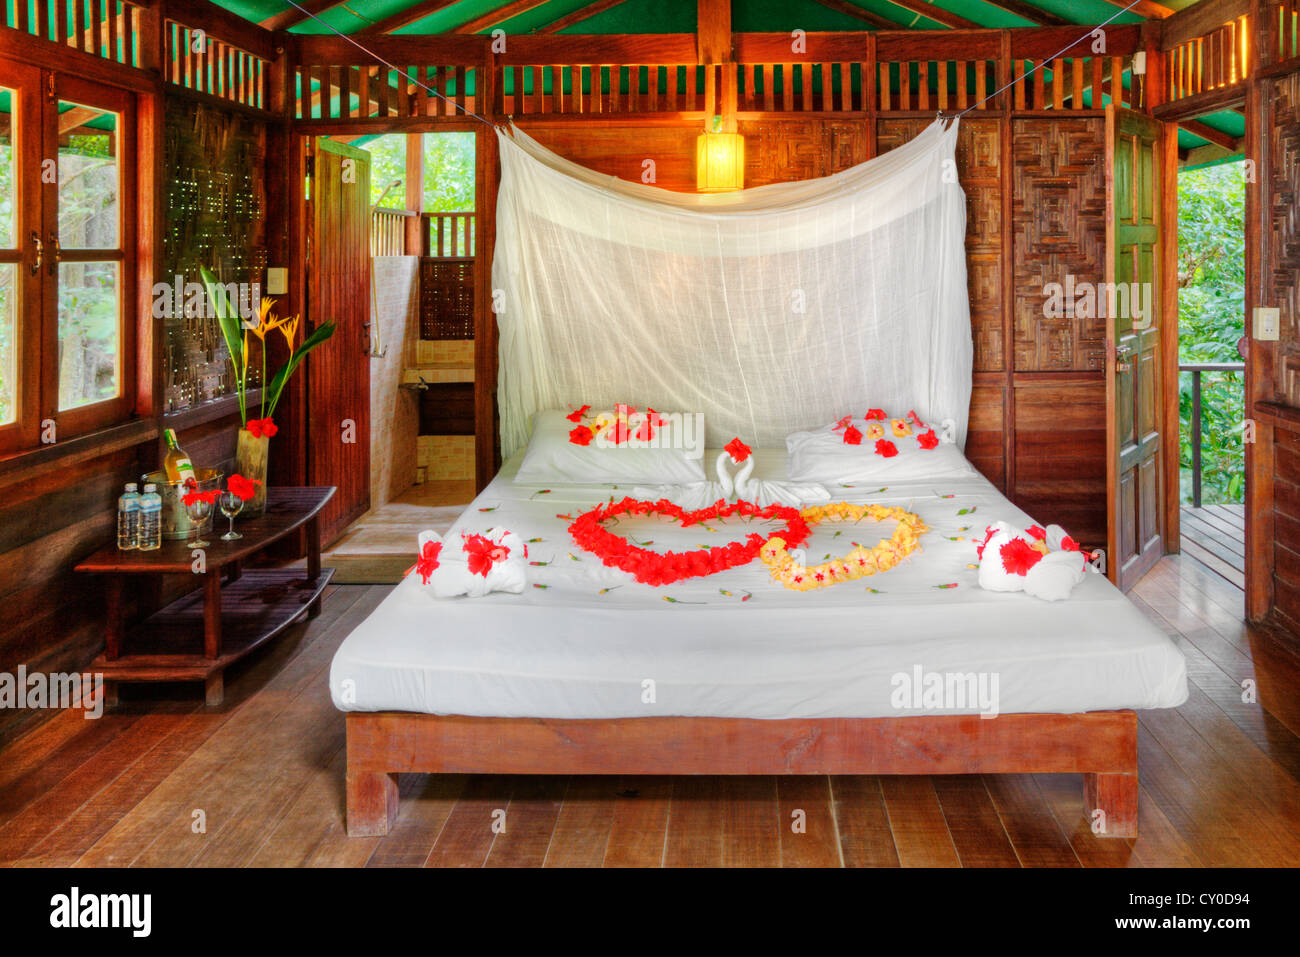 HONEYMOON SUITE interior package at OUR JUNGLE HOUSE a lodge near KHAO SOK NATIONAL PARK - SURATHANI PROVENCE, THAILAND Stock Photo